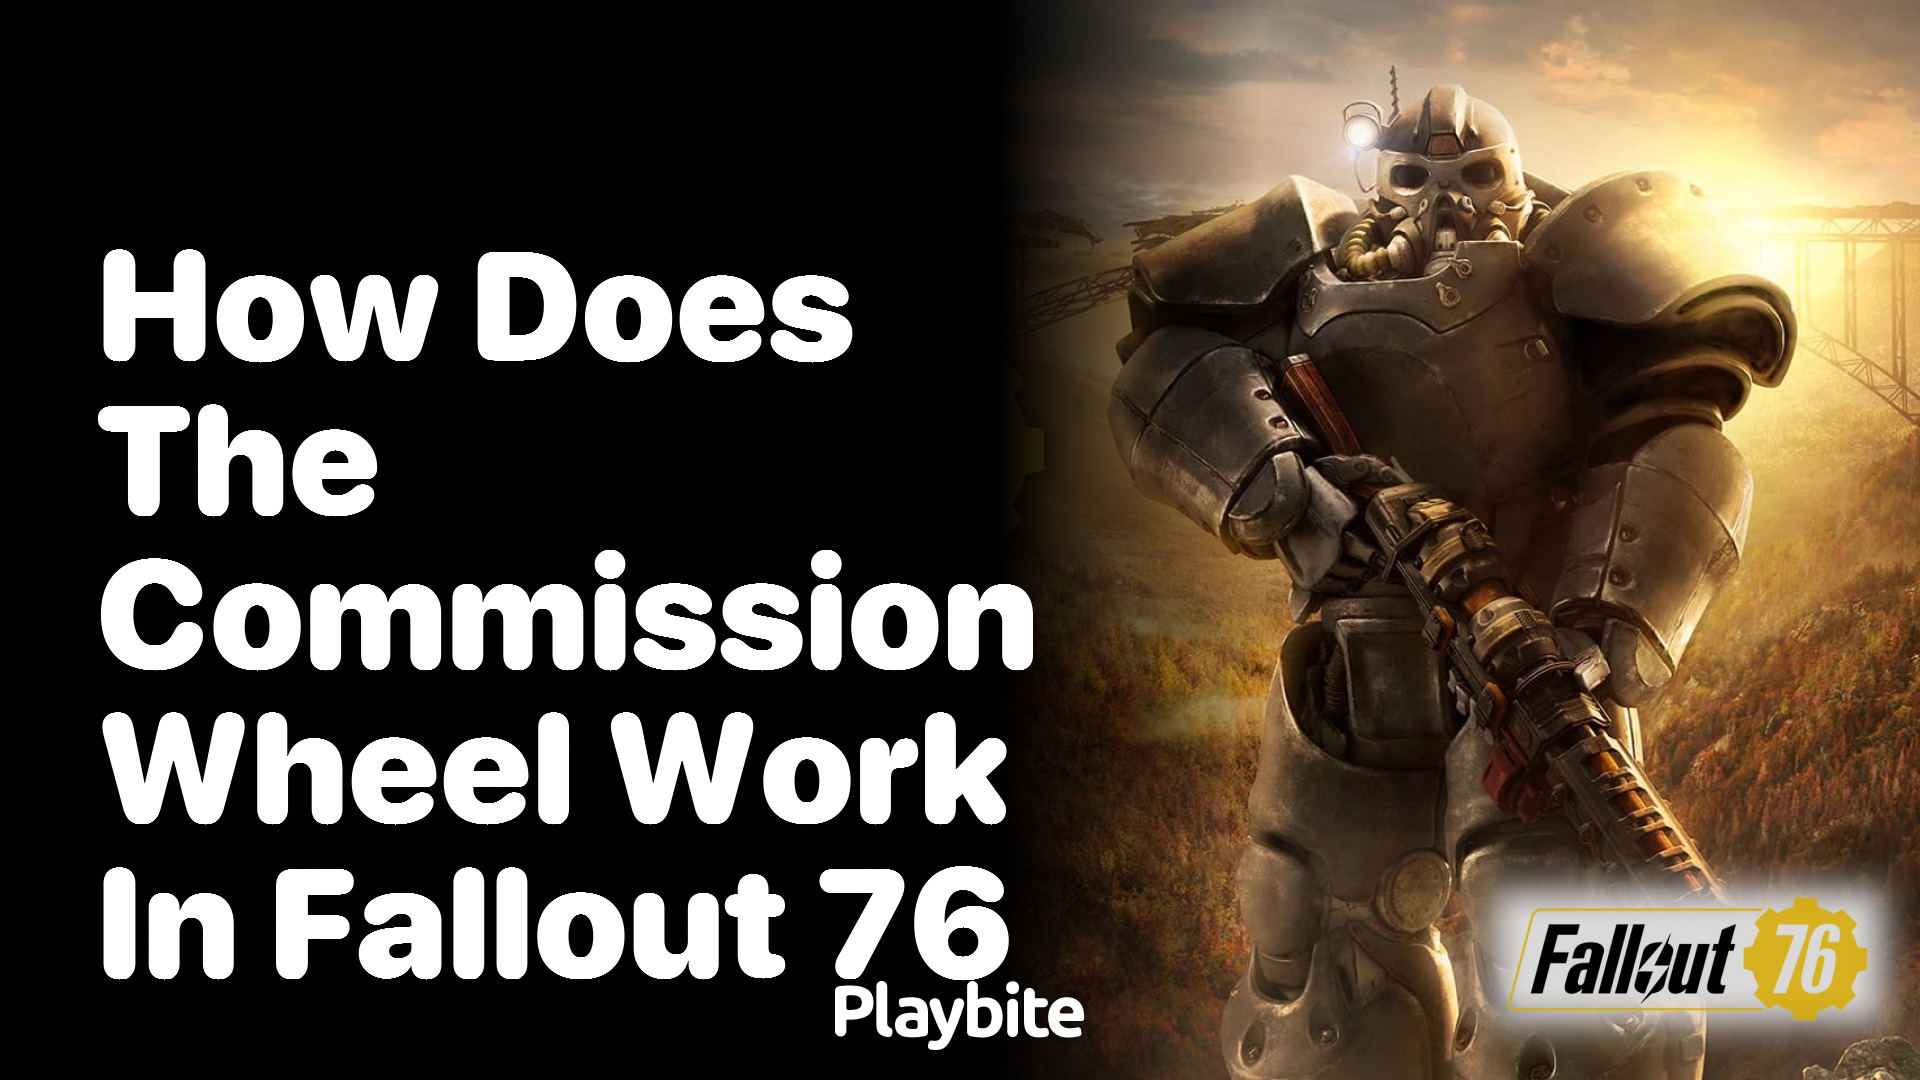 How does the Commission Wheel work in Fallout 76?